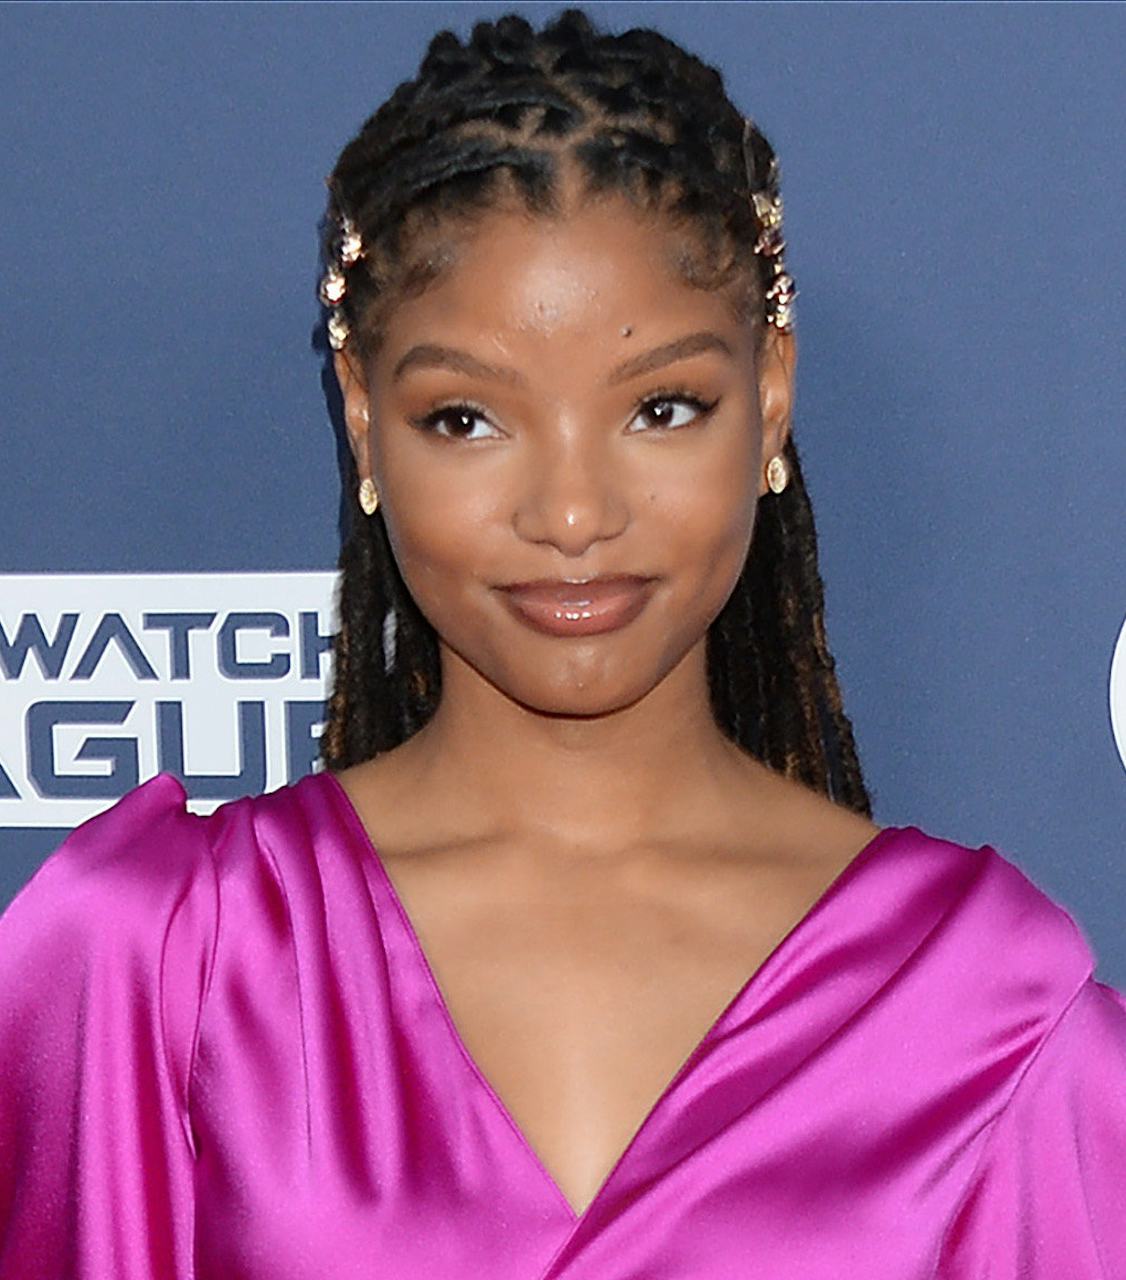 Halle Bailey Doesn't Pay Attention To Ariel Casting Backlash